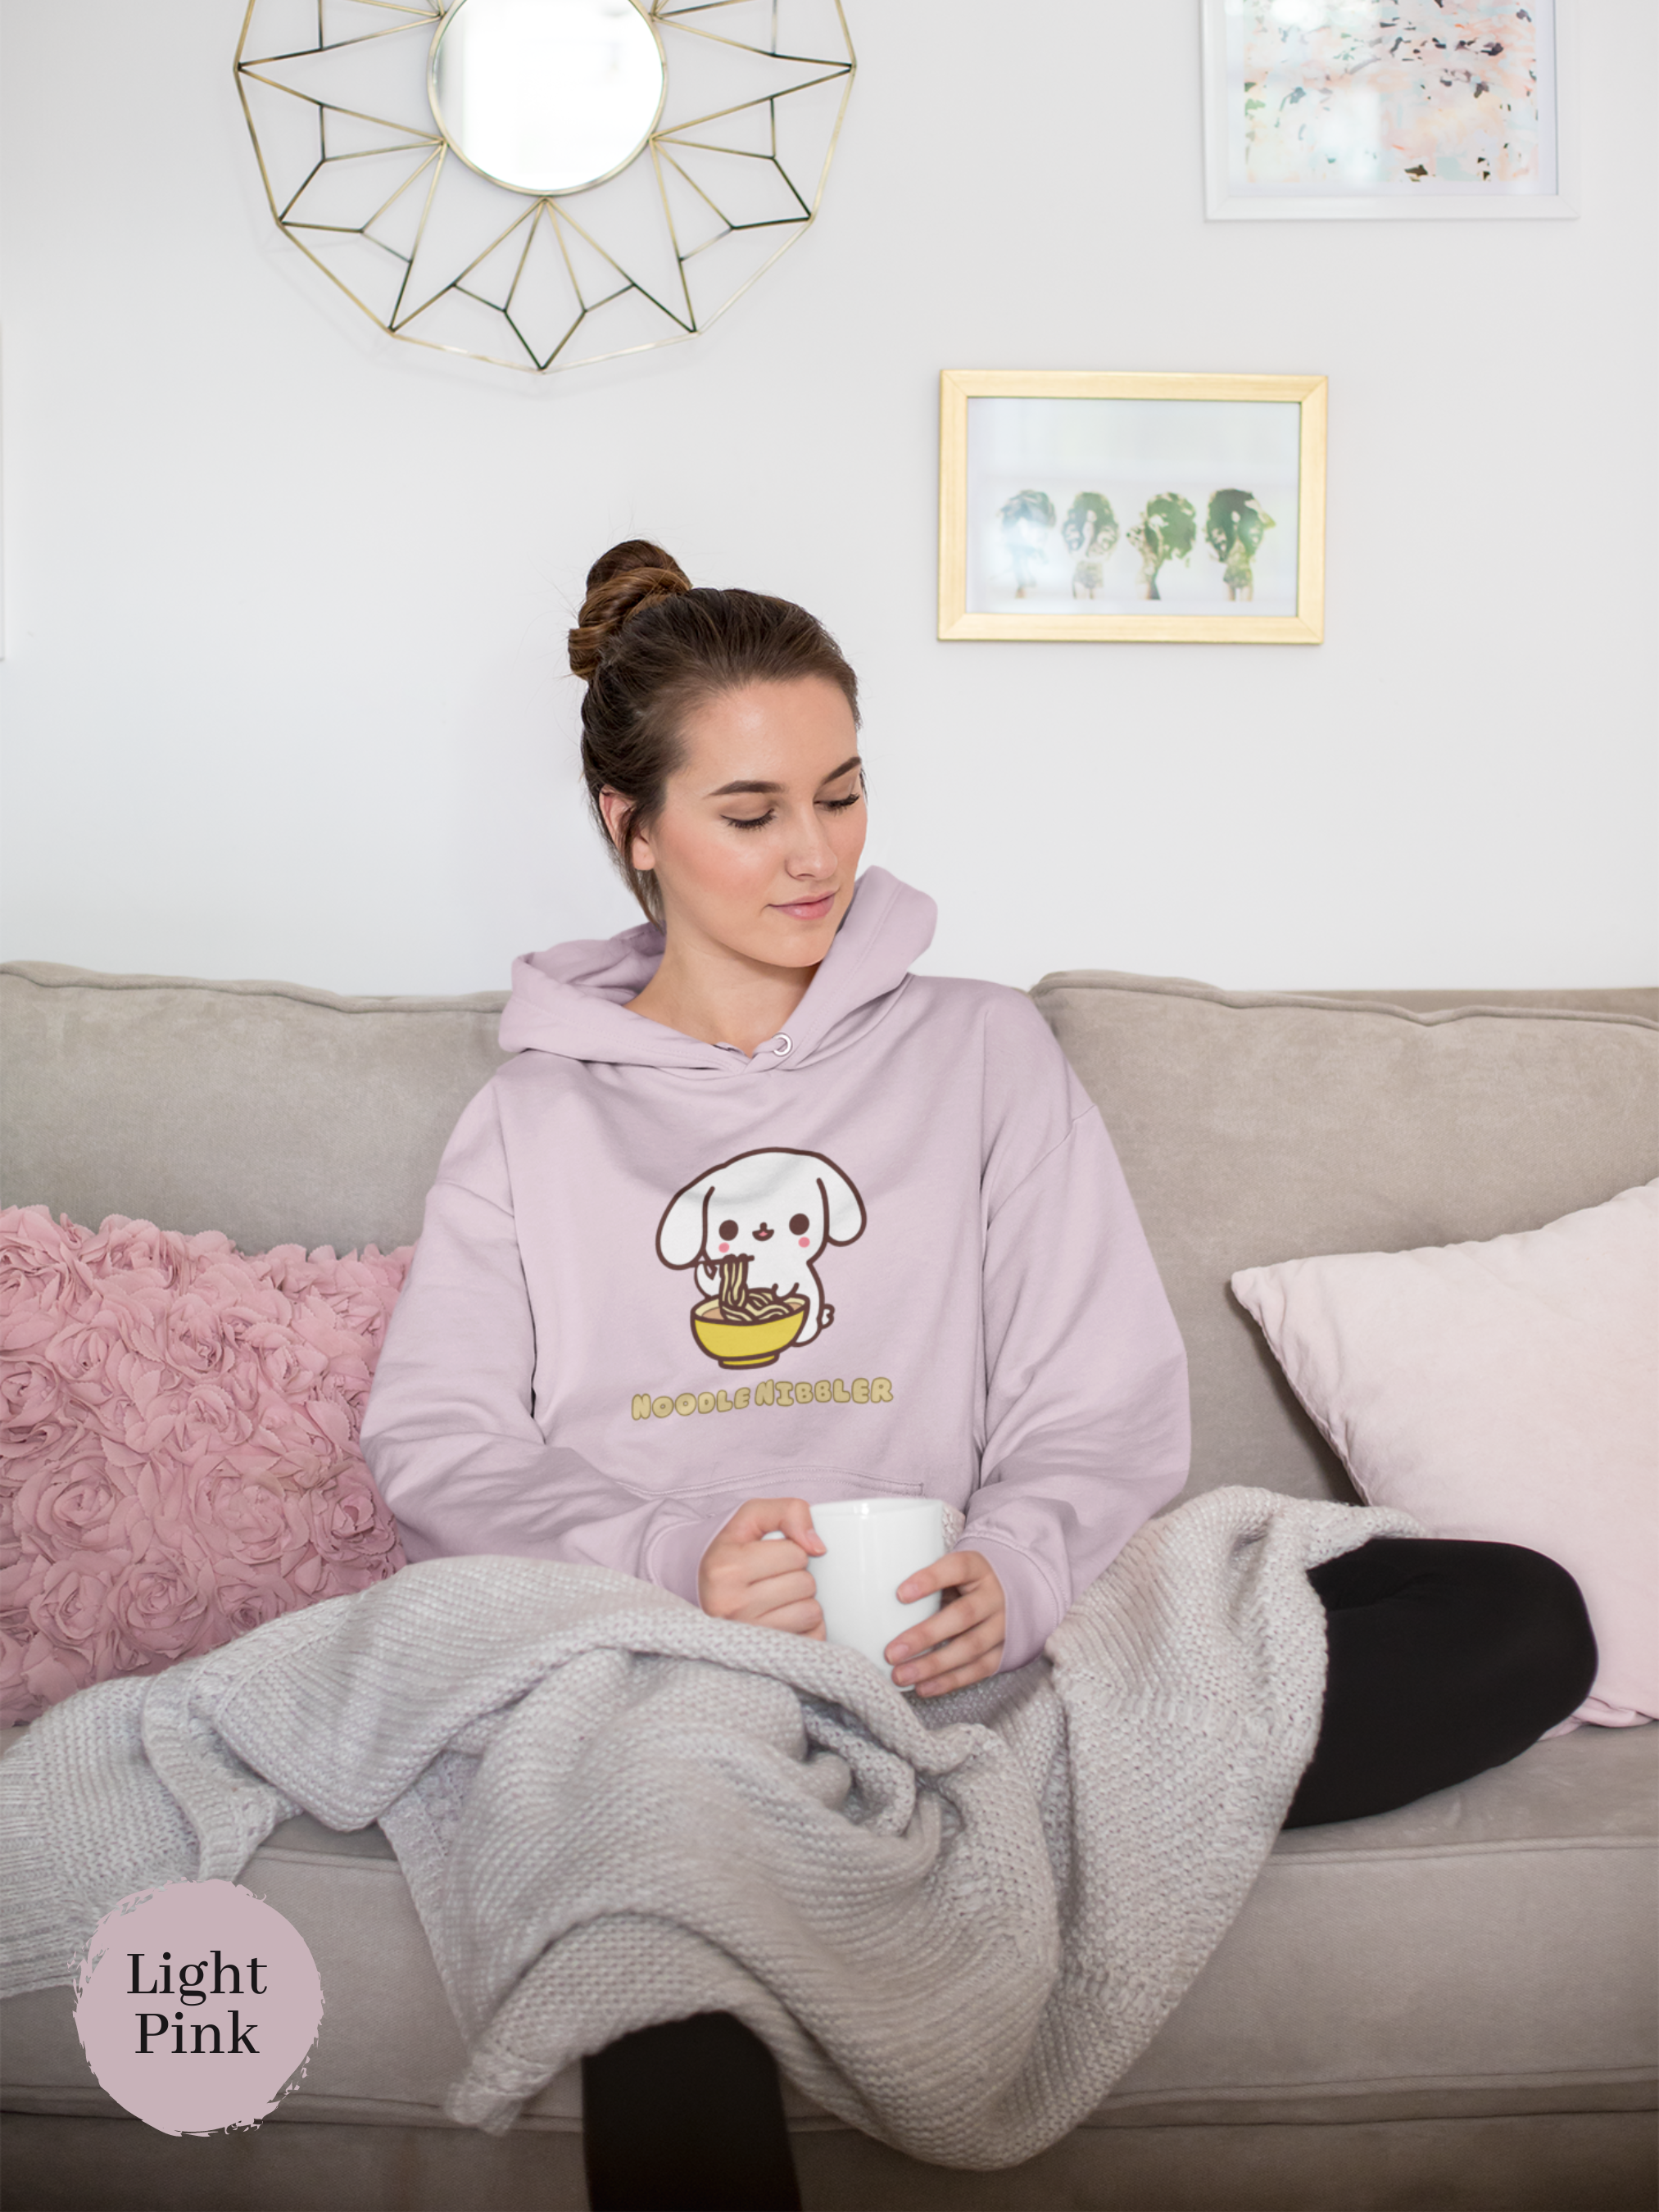 Ramen Hoodie: Noodle Nibbler Bunny Edition - A Cozy Pun Hoodie for Foodie Fans of Ramen Art and Asian Cuisine